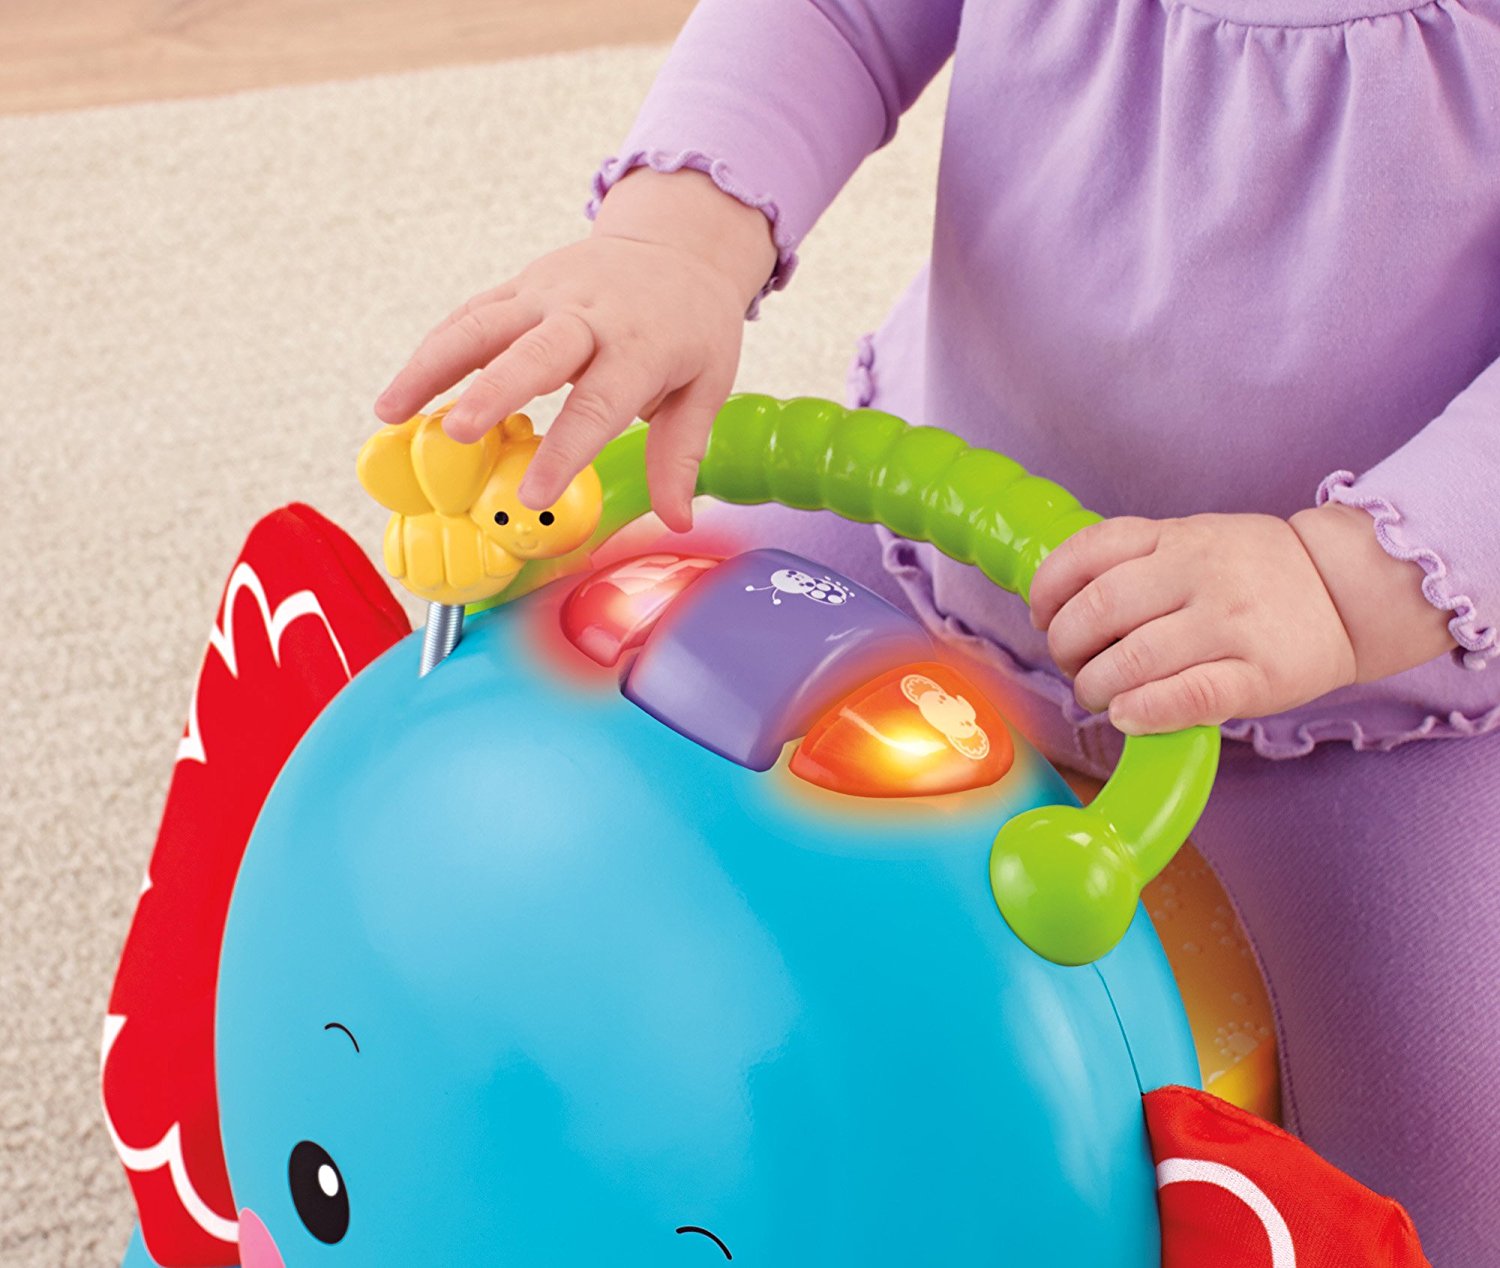 fisher price elephant bounce and ride